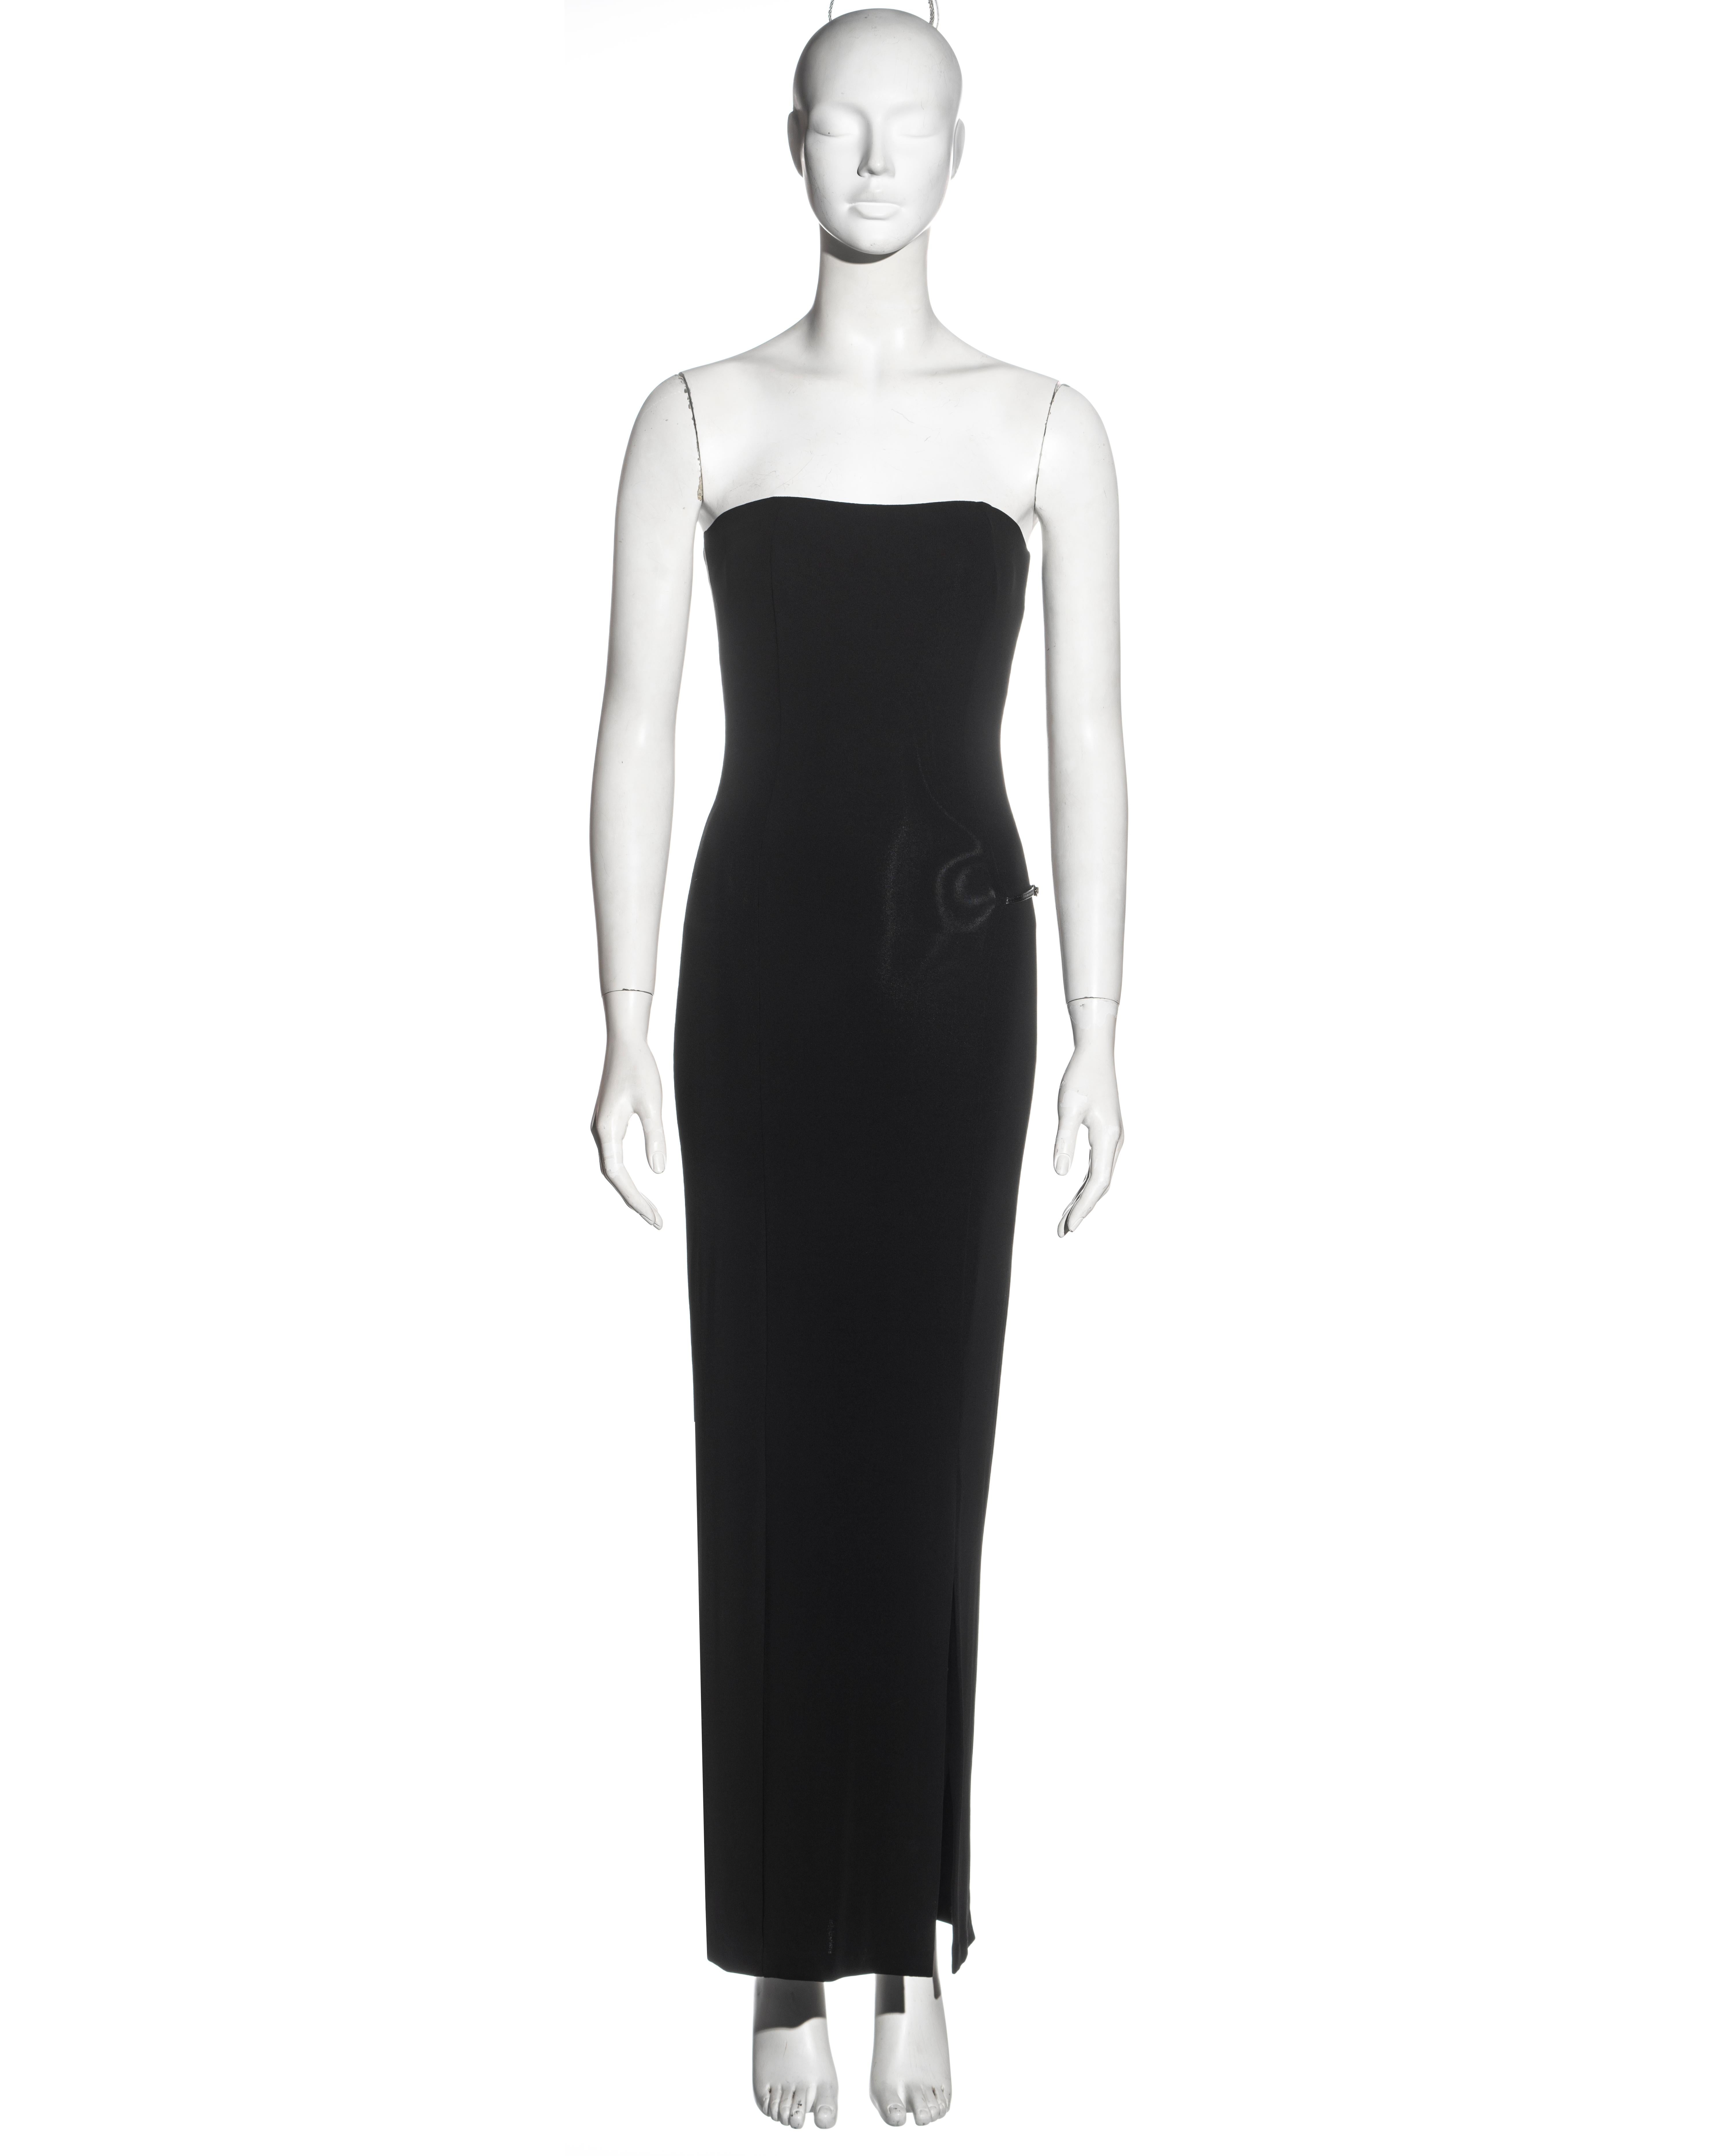 ▪ Gucci black strapless evening dress 
▪ Designed by Tom Ford 
▪ Fine rayon and spandex jersey 
▪ Leather strap with Gucci 'G' metal buckle 
▪ Leg slit 
▪ IT 40 - FR 36 - UK 8
▪ Spring-Summer 1998
▪ 94% Rayon, 6% Spandex
▪ Made in Italy